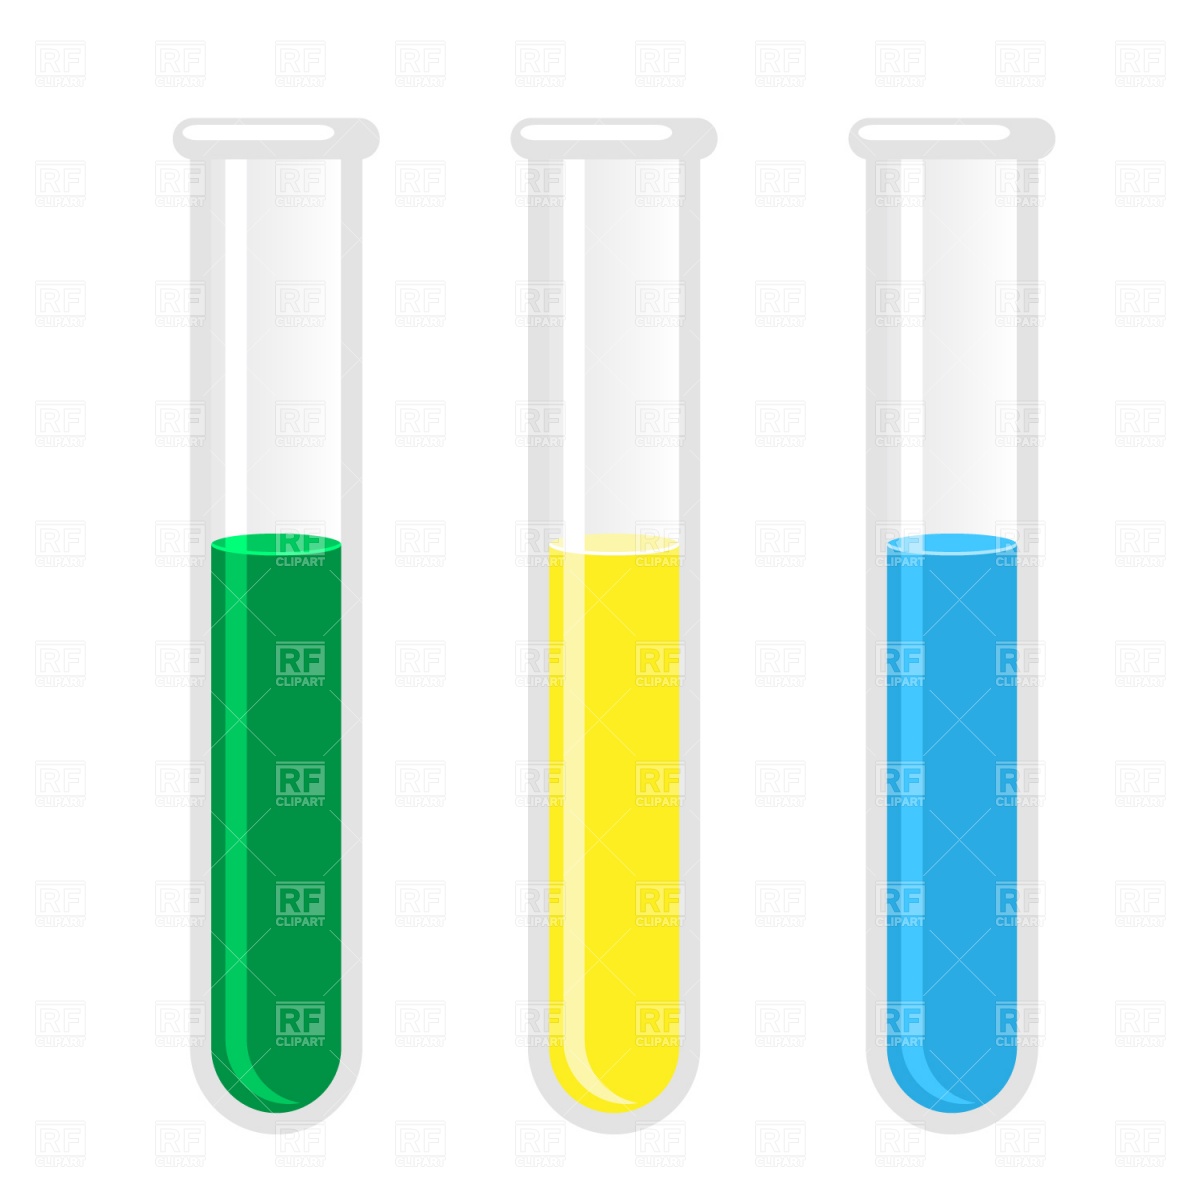 Test Tube 451 Healthcare Medical Download Free Vector Clipart  Eps